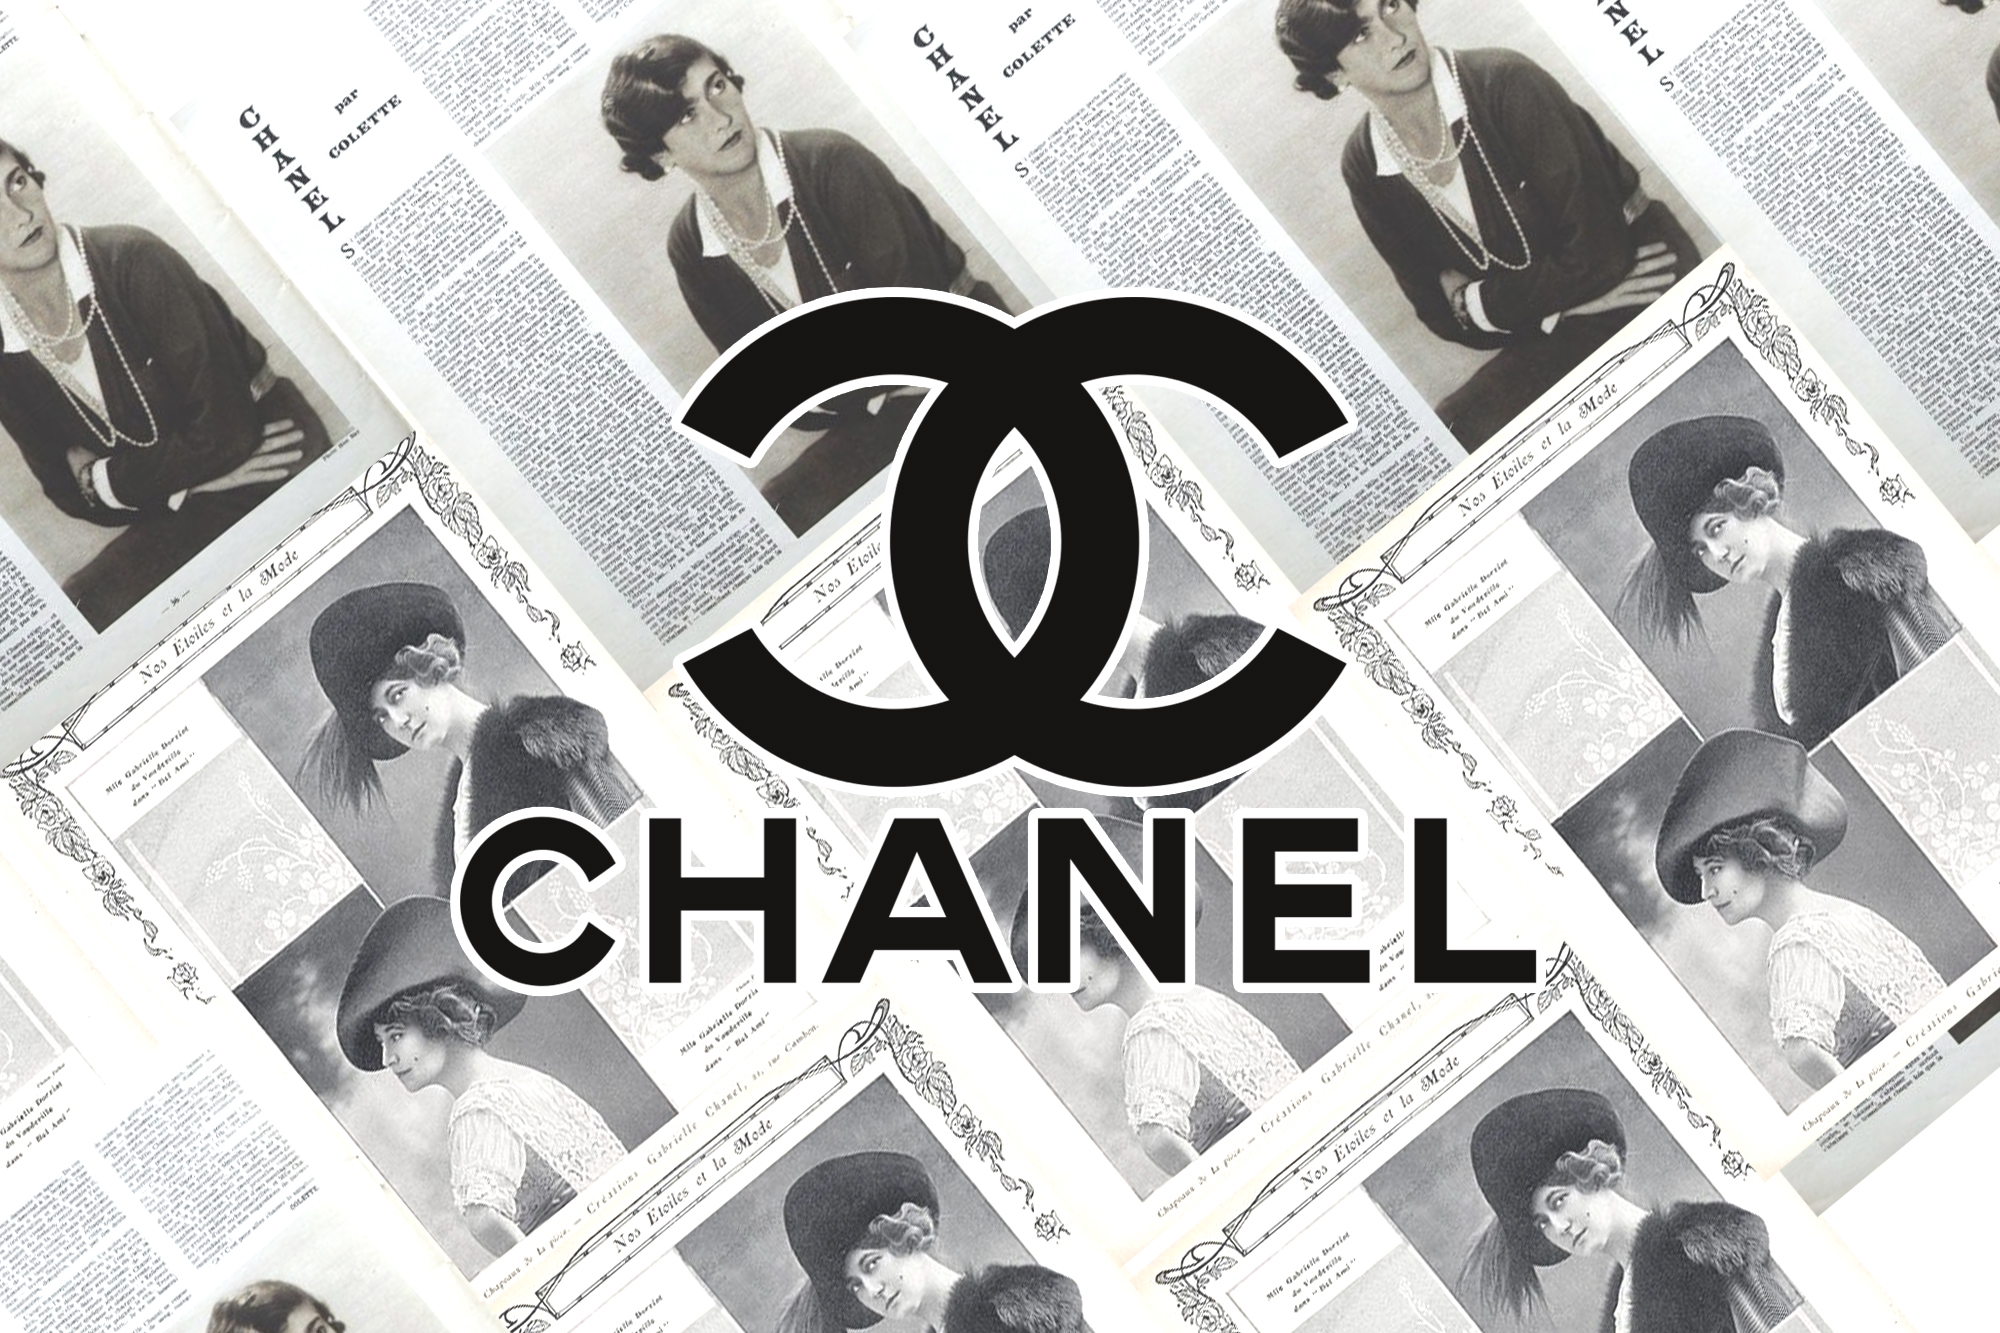 Chanel S.A. Is A Parisian Fashion House Founded Gabrielle Coco